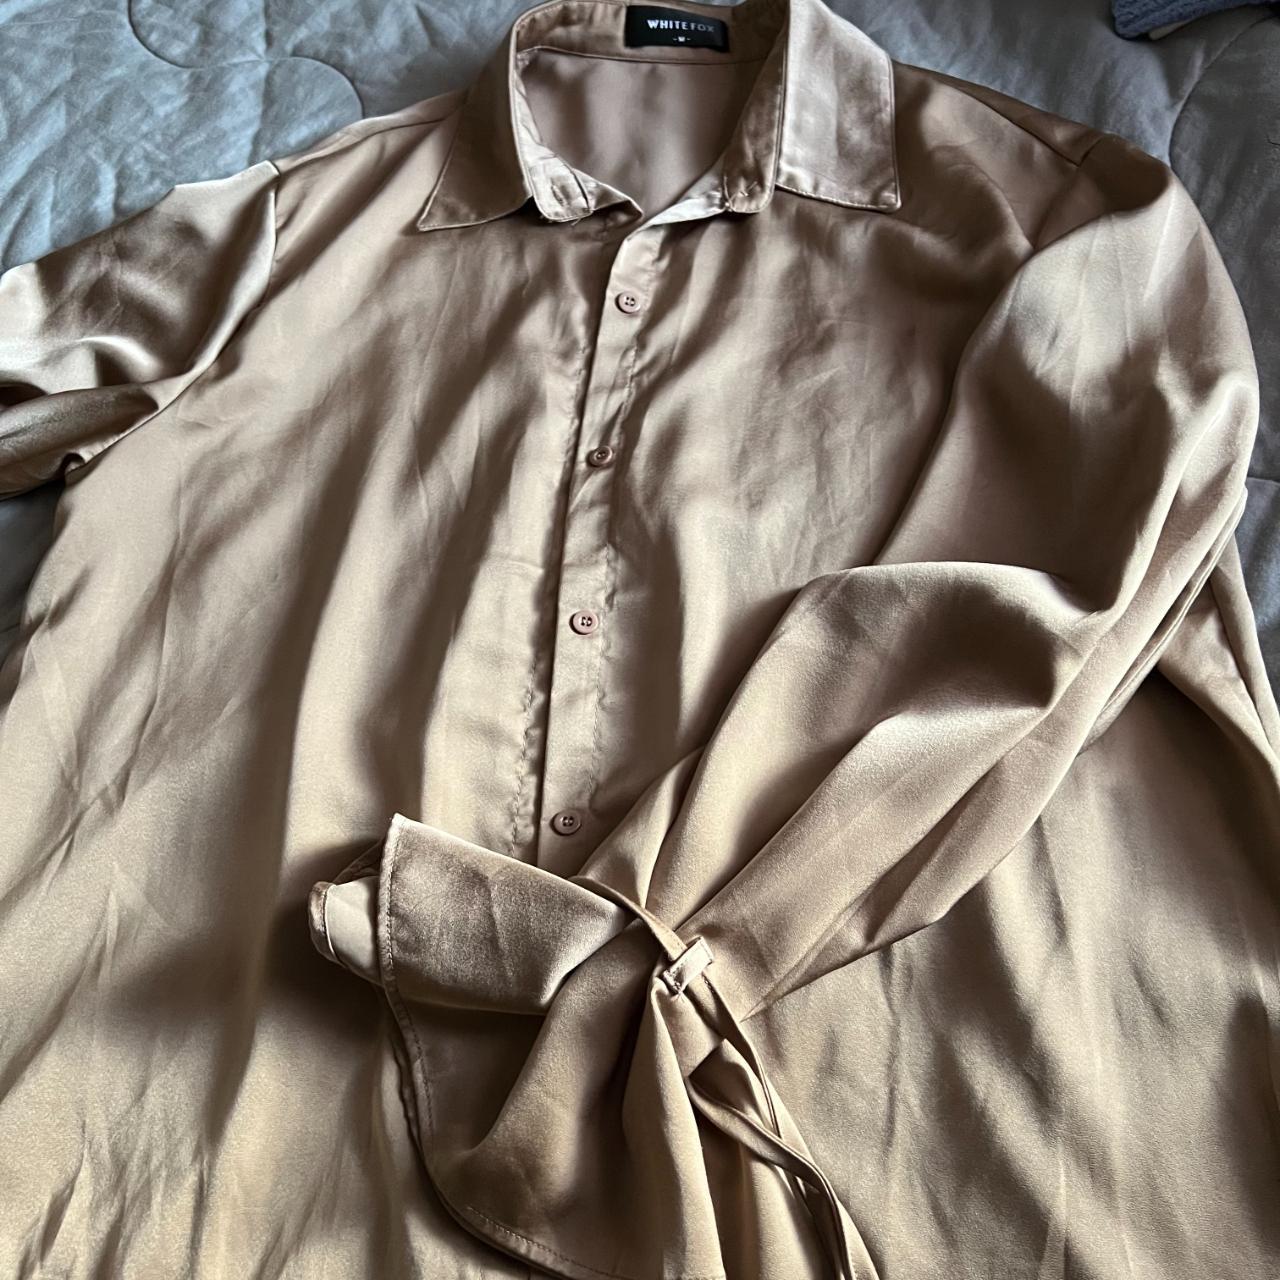 Barely worn white fox blouse with adjustable ties at... - Depop